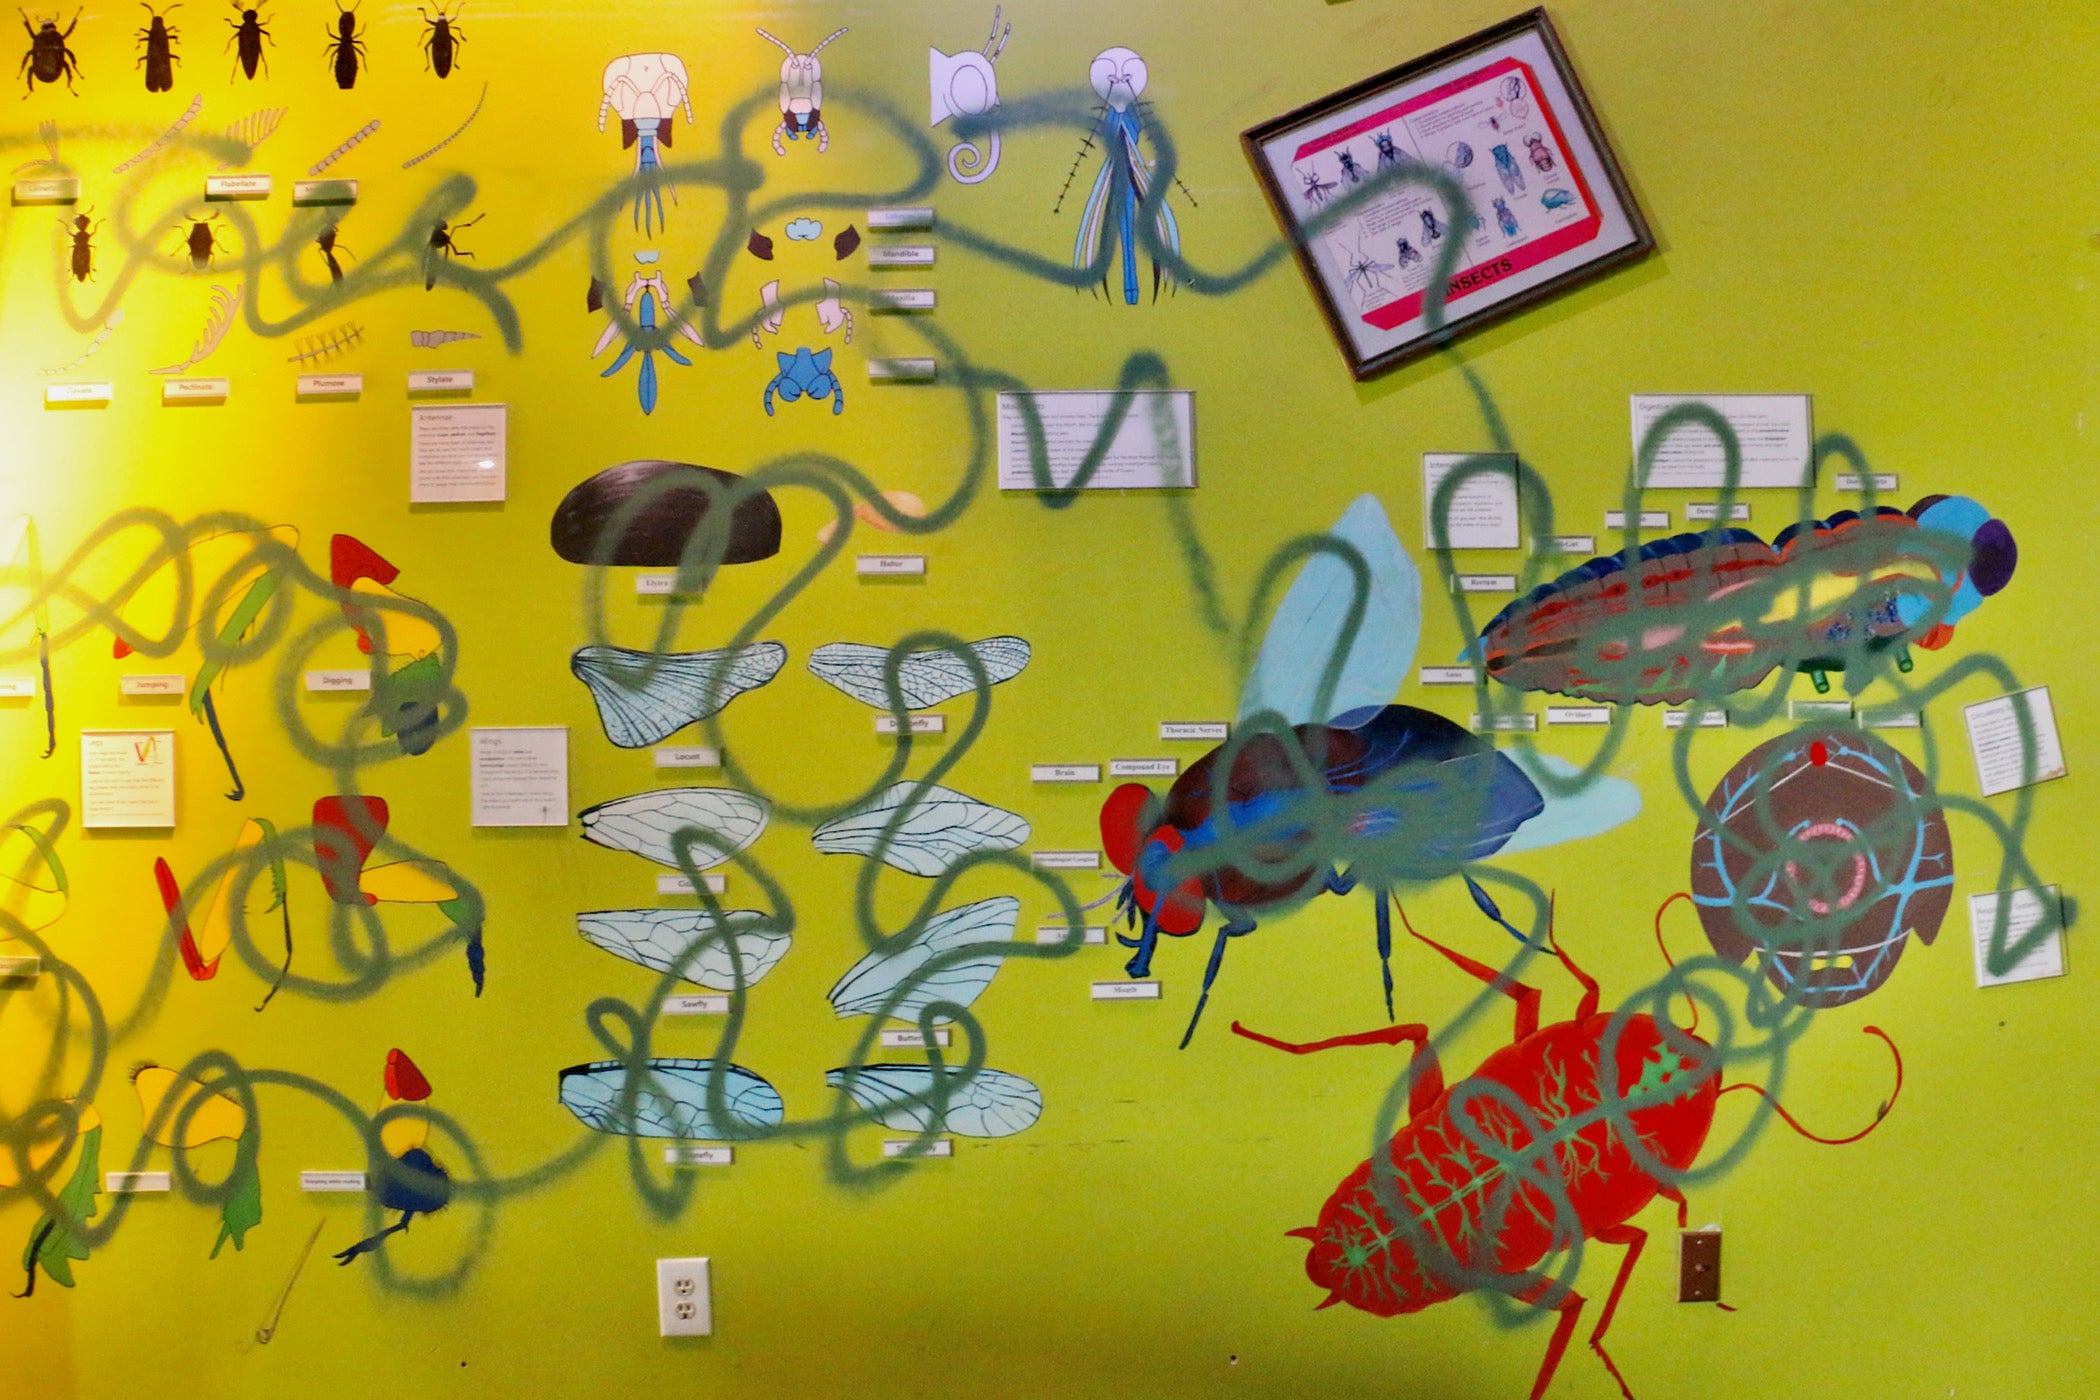 A wall showing insect anatomy has graffiti all over it.